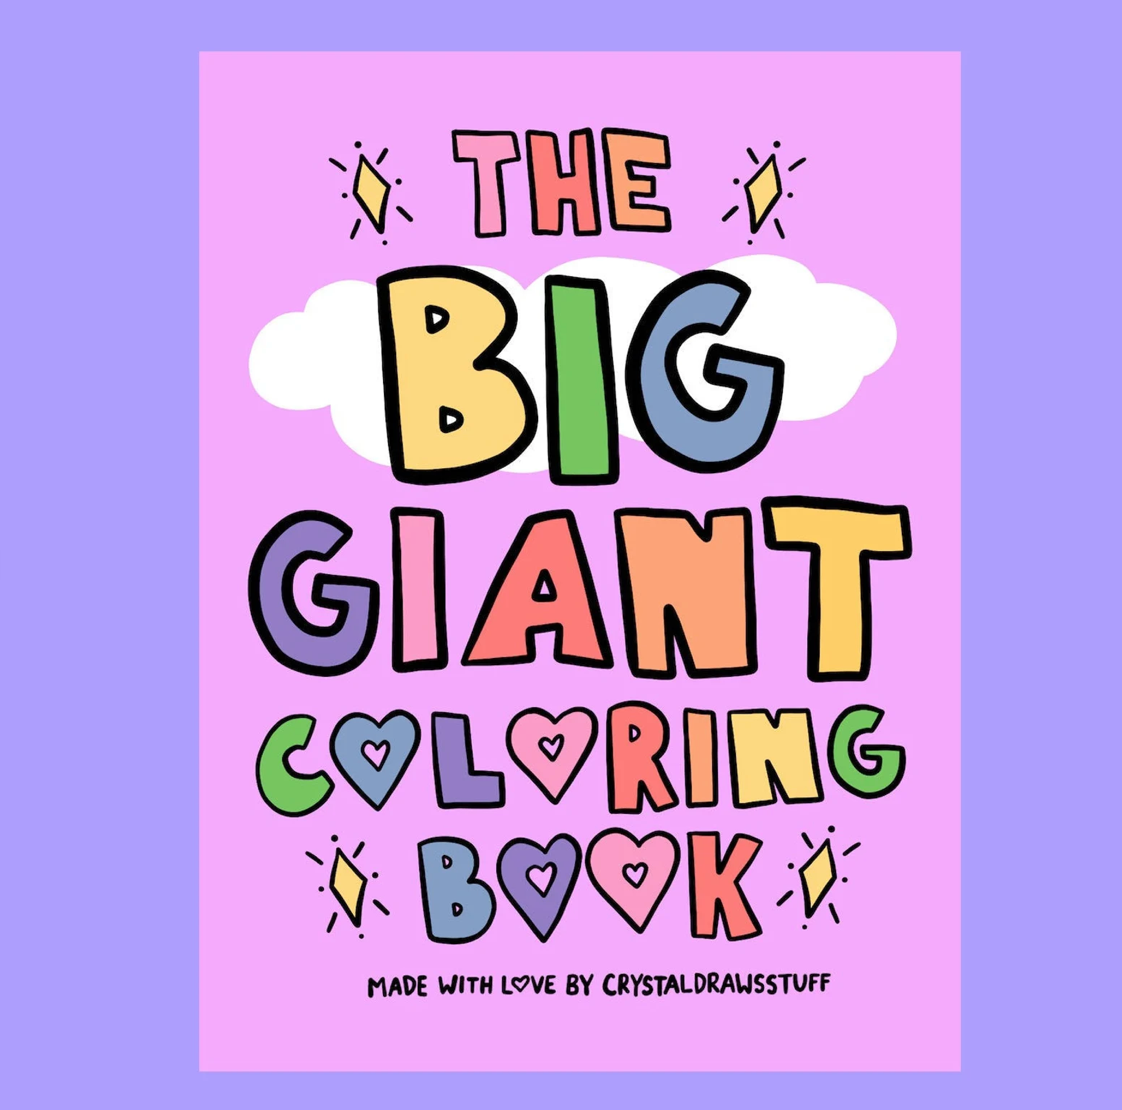 The Big Giant Coloring Book - 172 PAGES! (Digital Download)